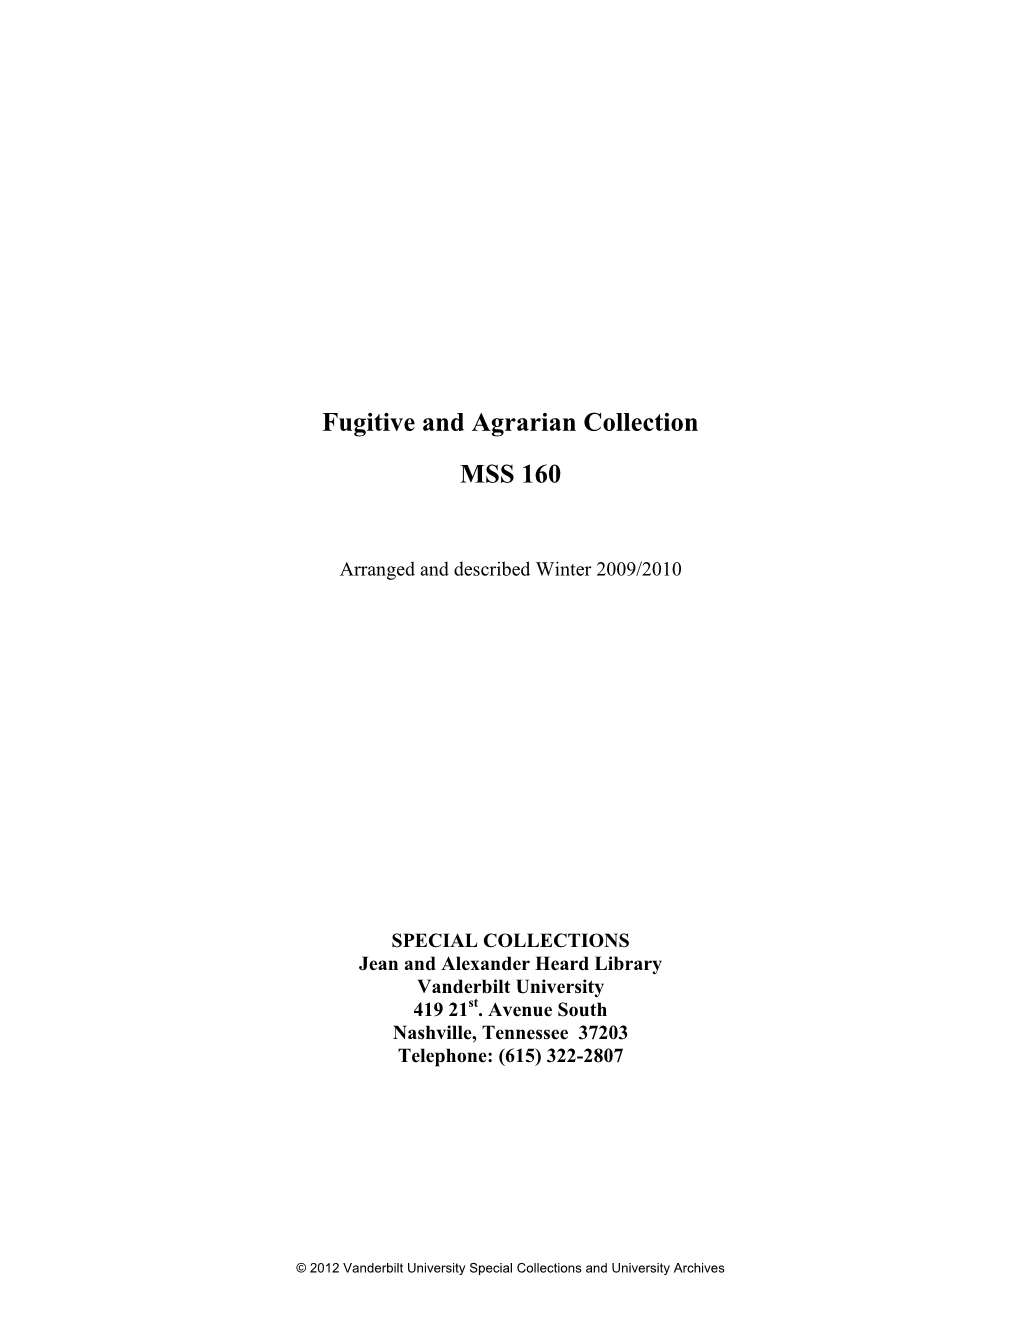 Fugitive Agrarian Collection